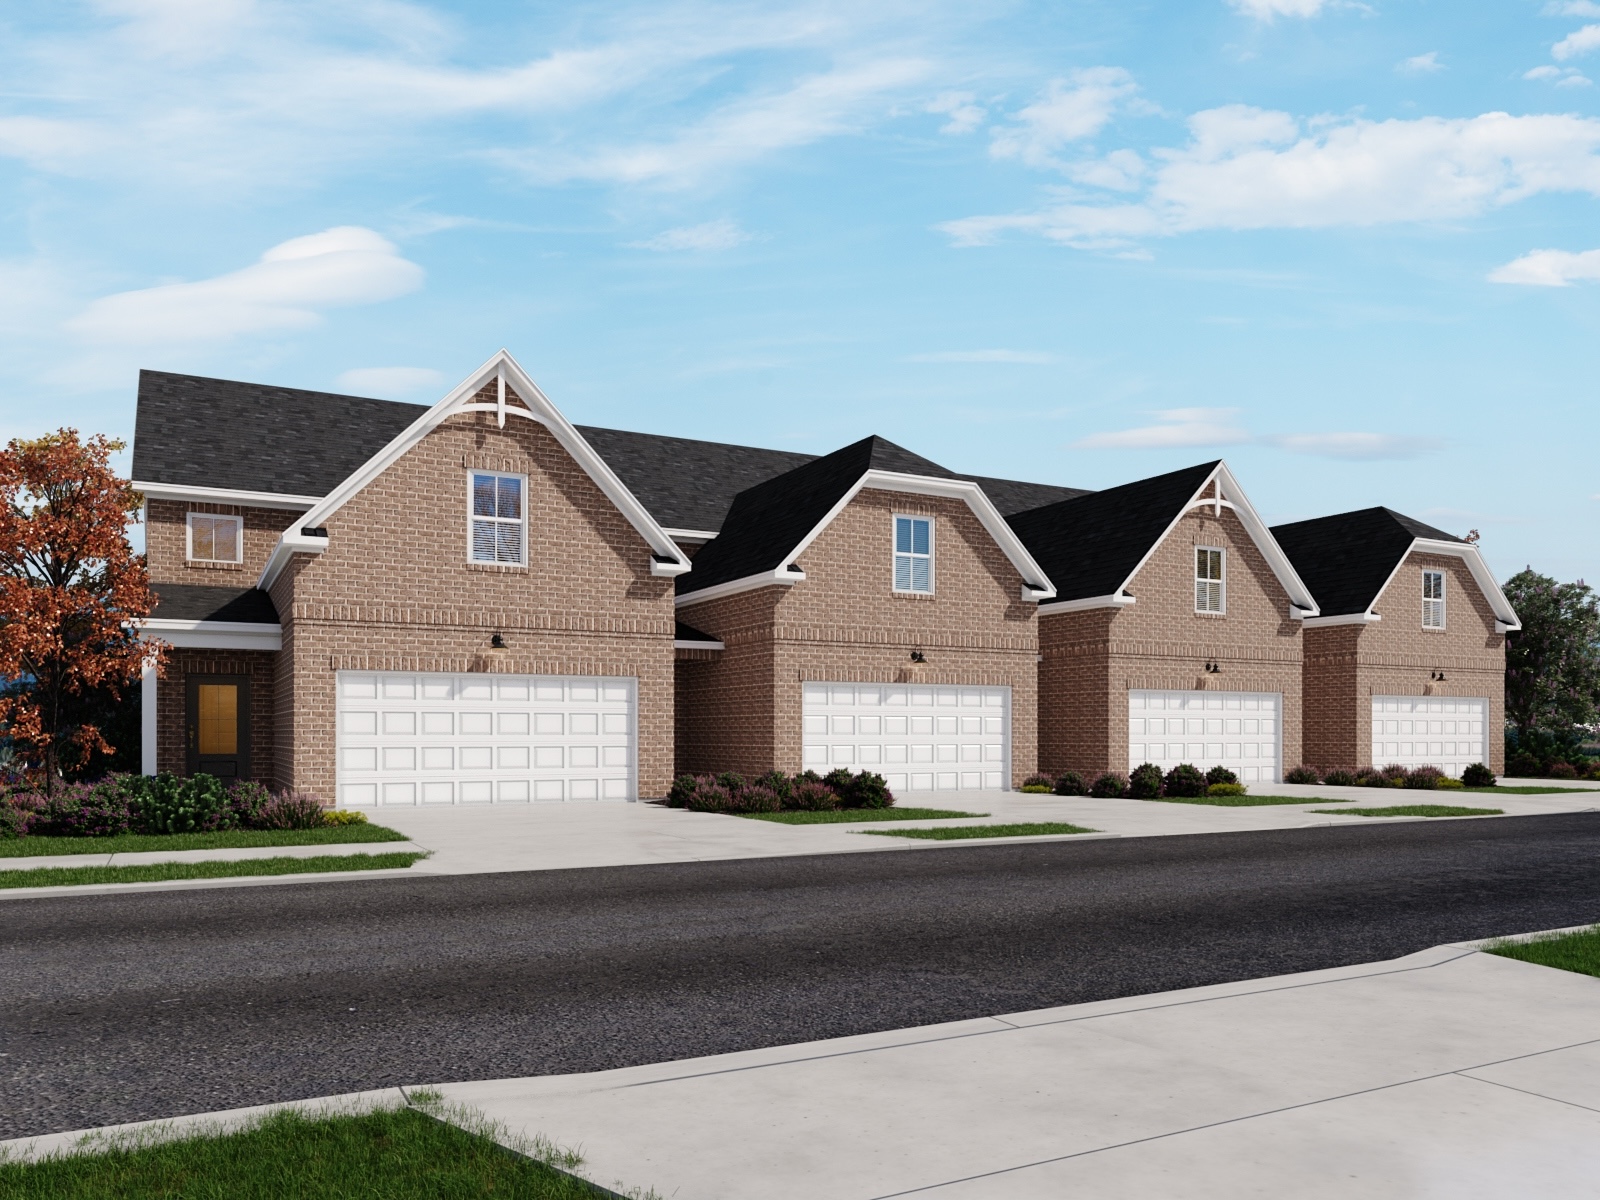 Helmsley Place 55+ Townhomes